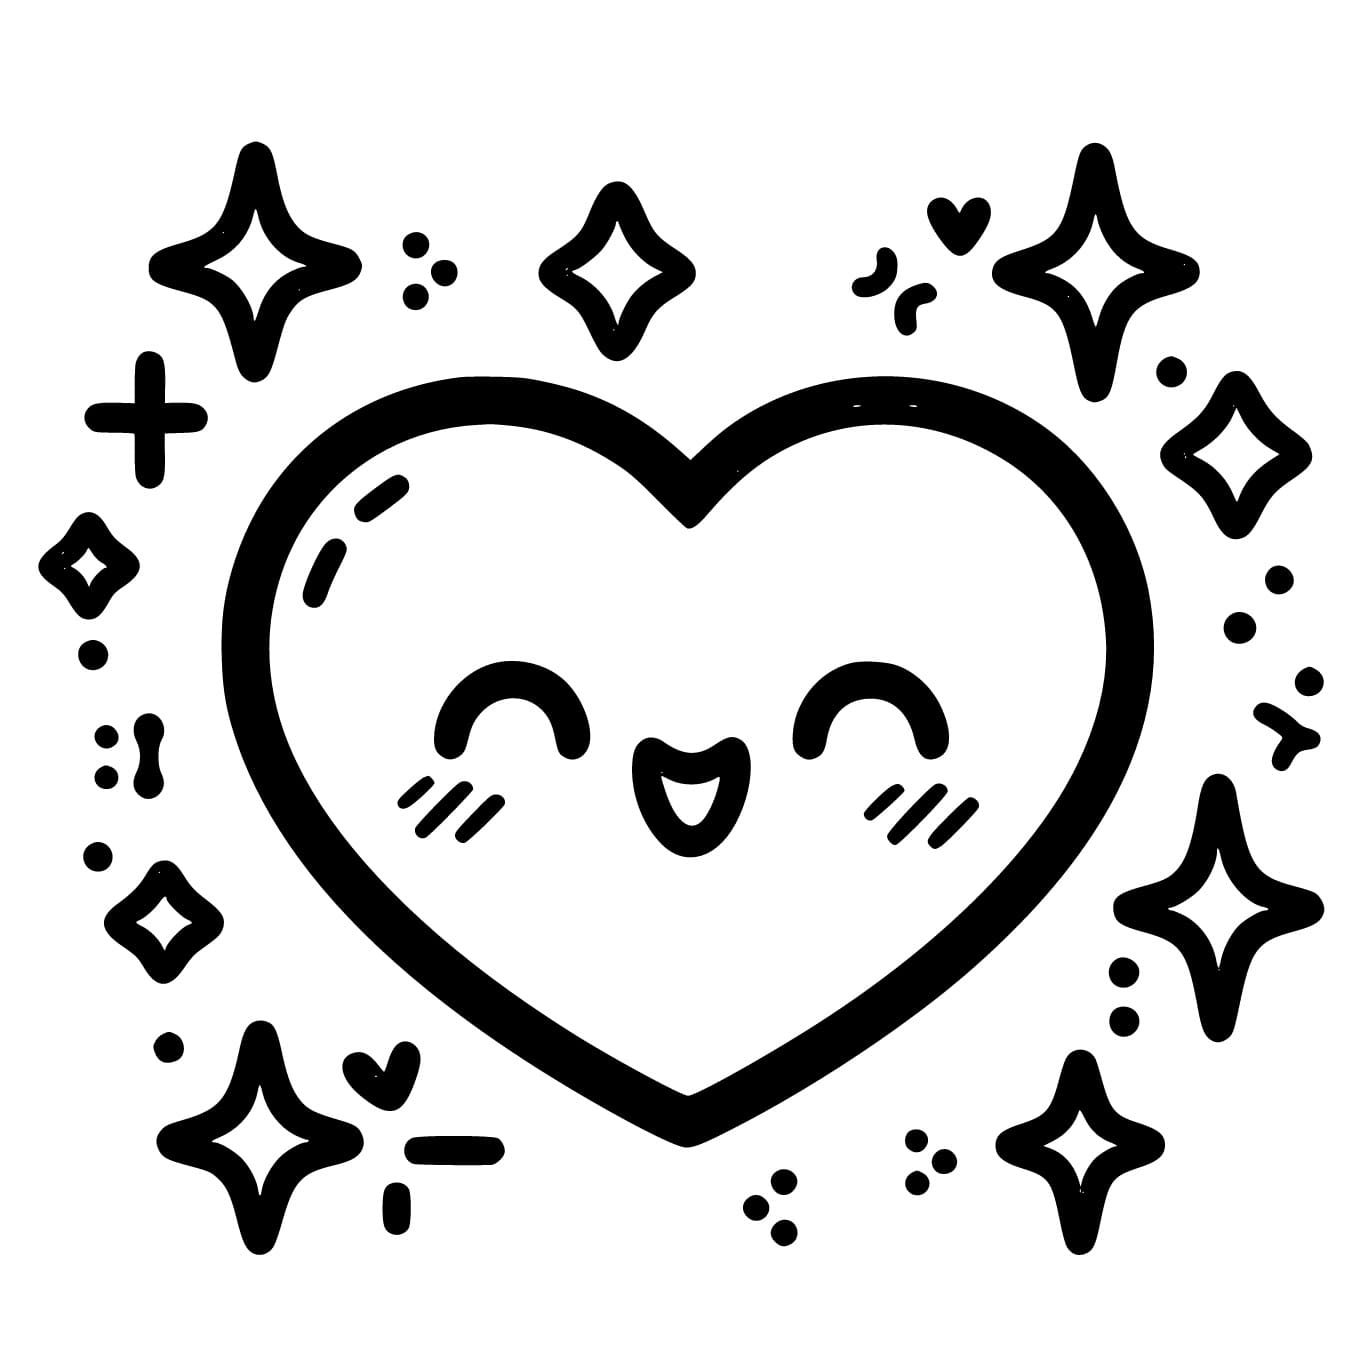 Joli Coeur Souriant coloring page